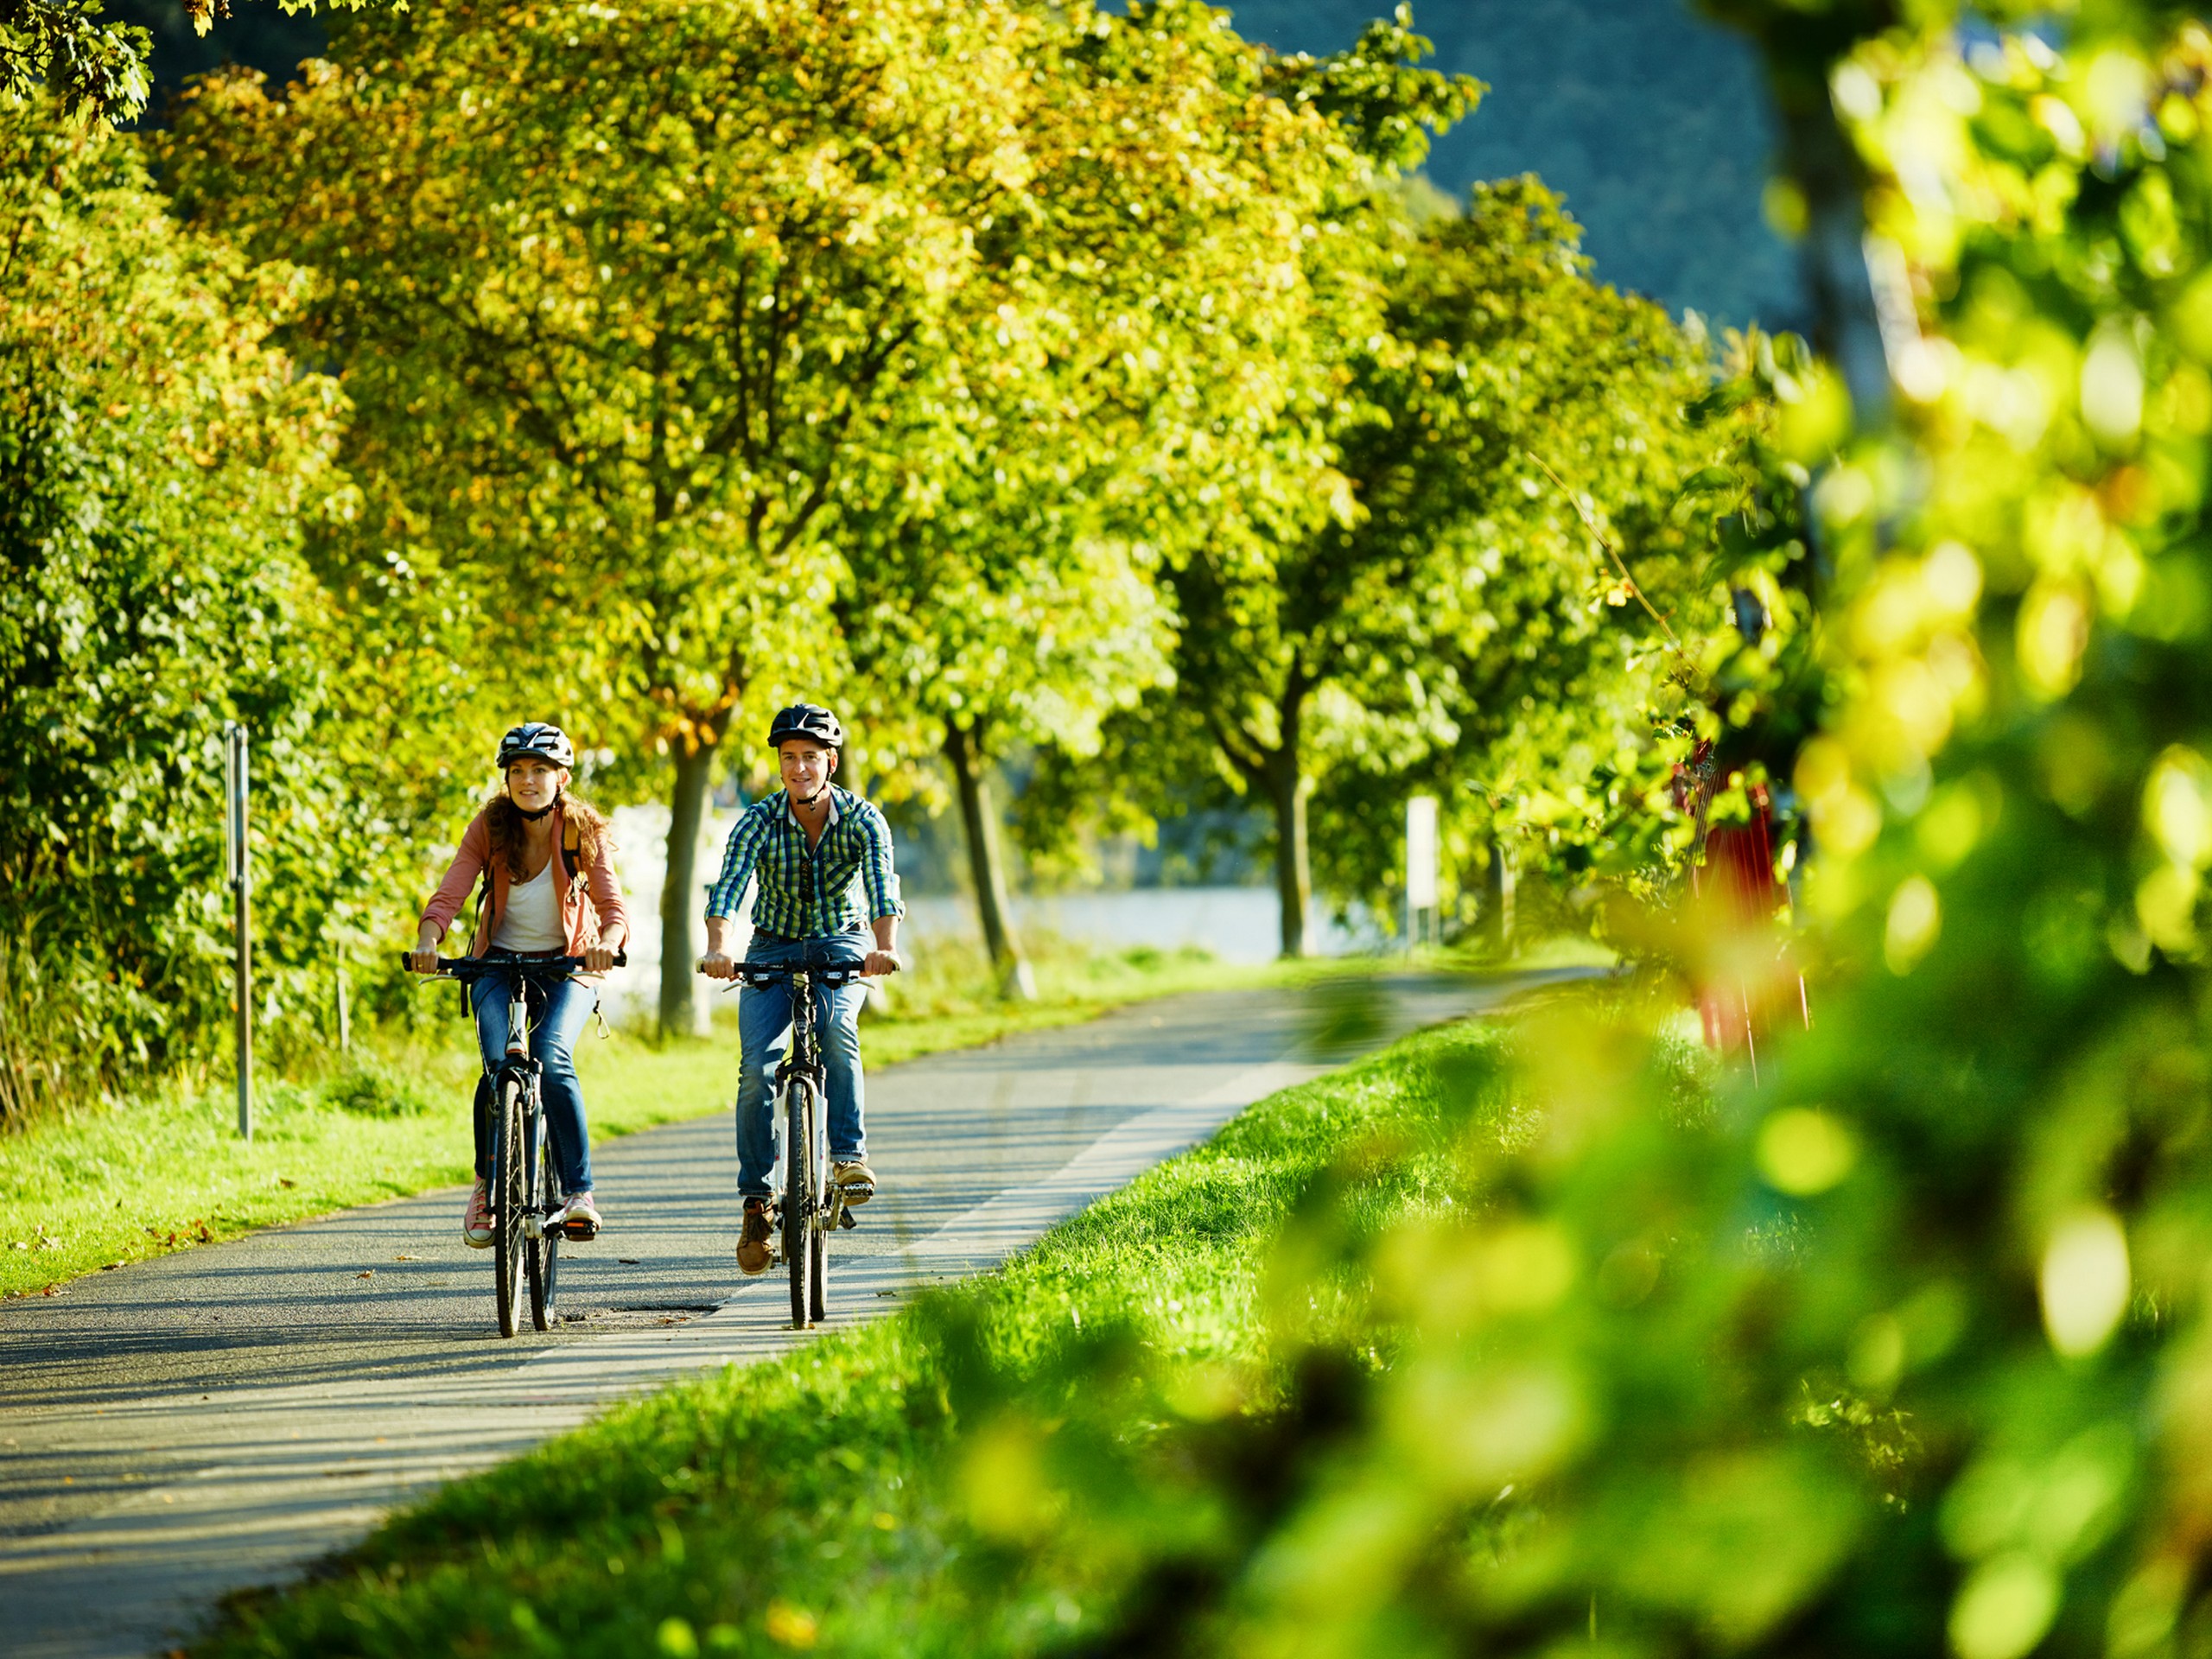 Cycling the vineyards along the Moselle River